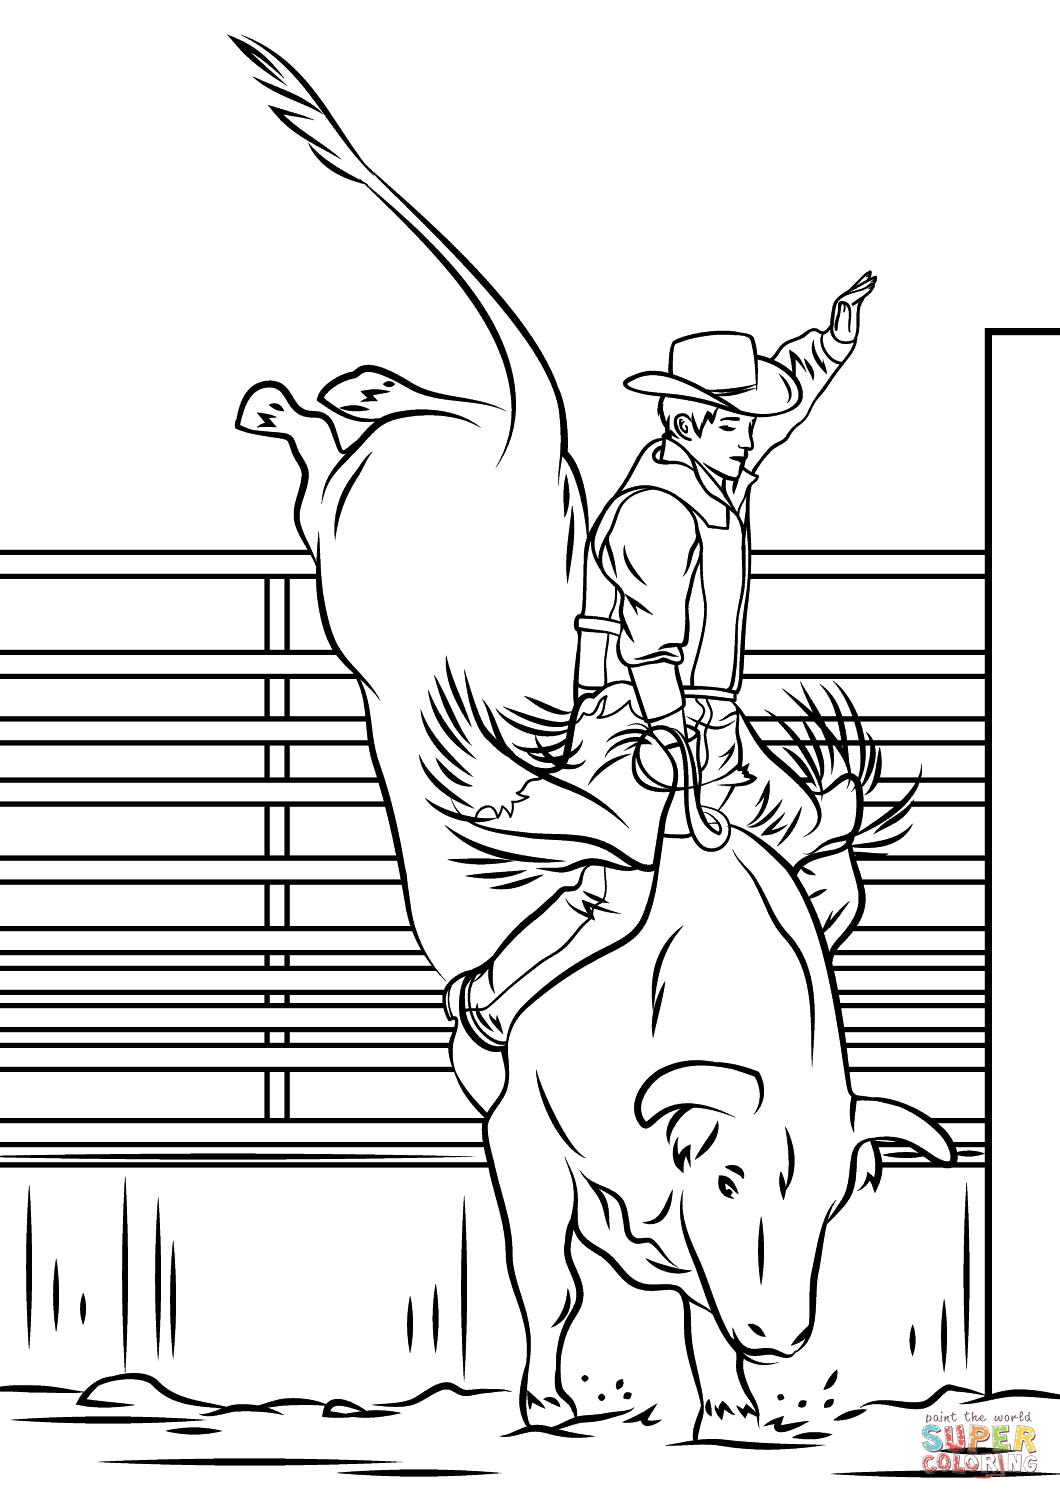 Bull Riding Coloring Pages Bull Riding Rodeo Coloring Page Free Printable Coloring Pages